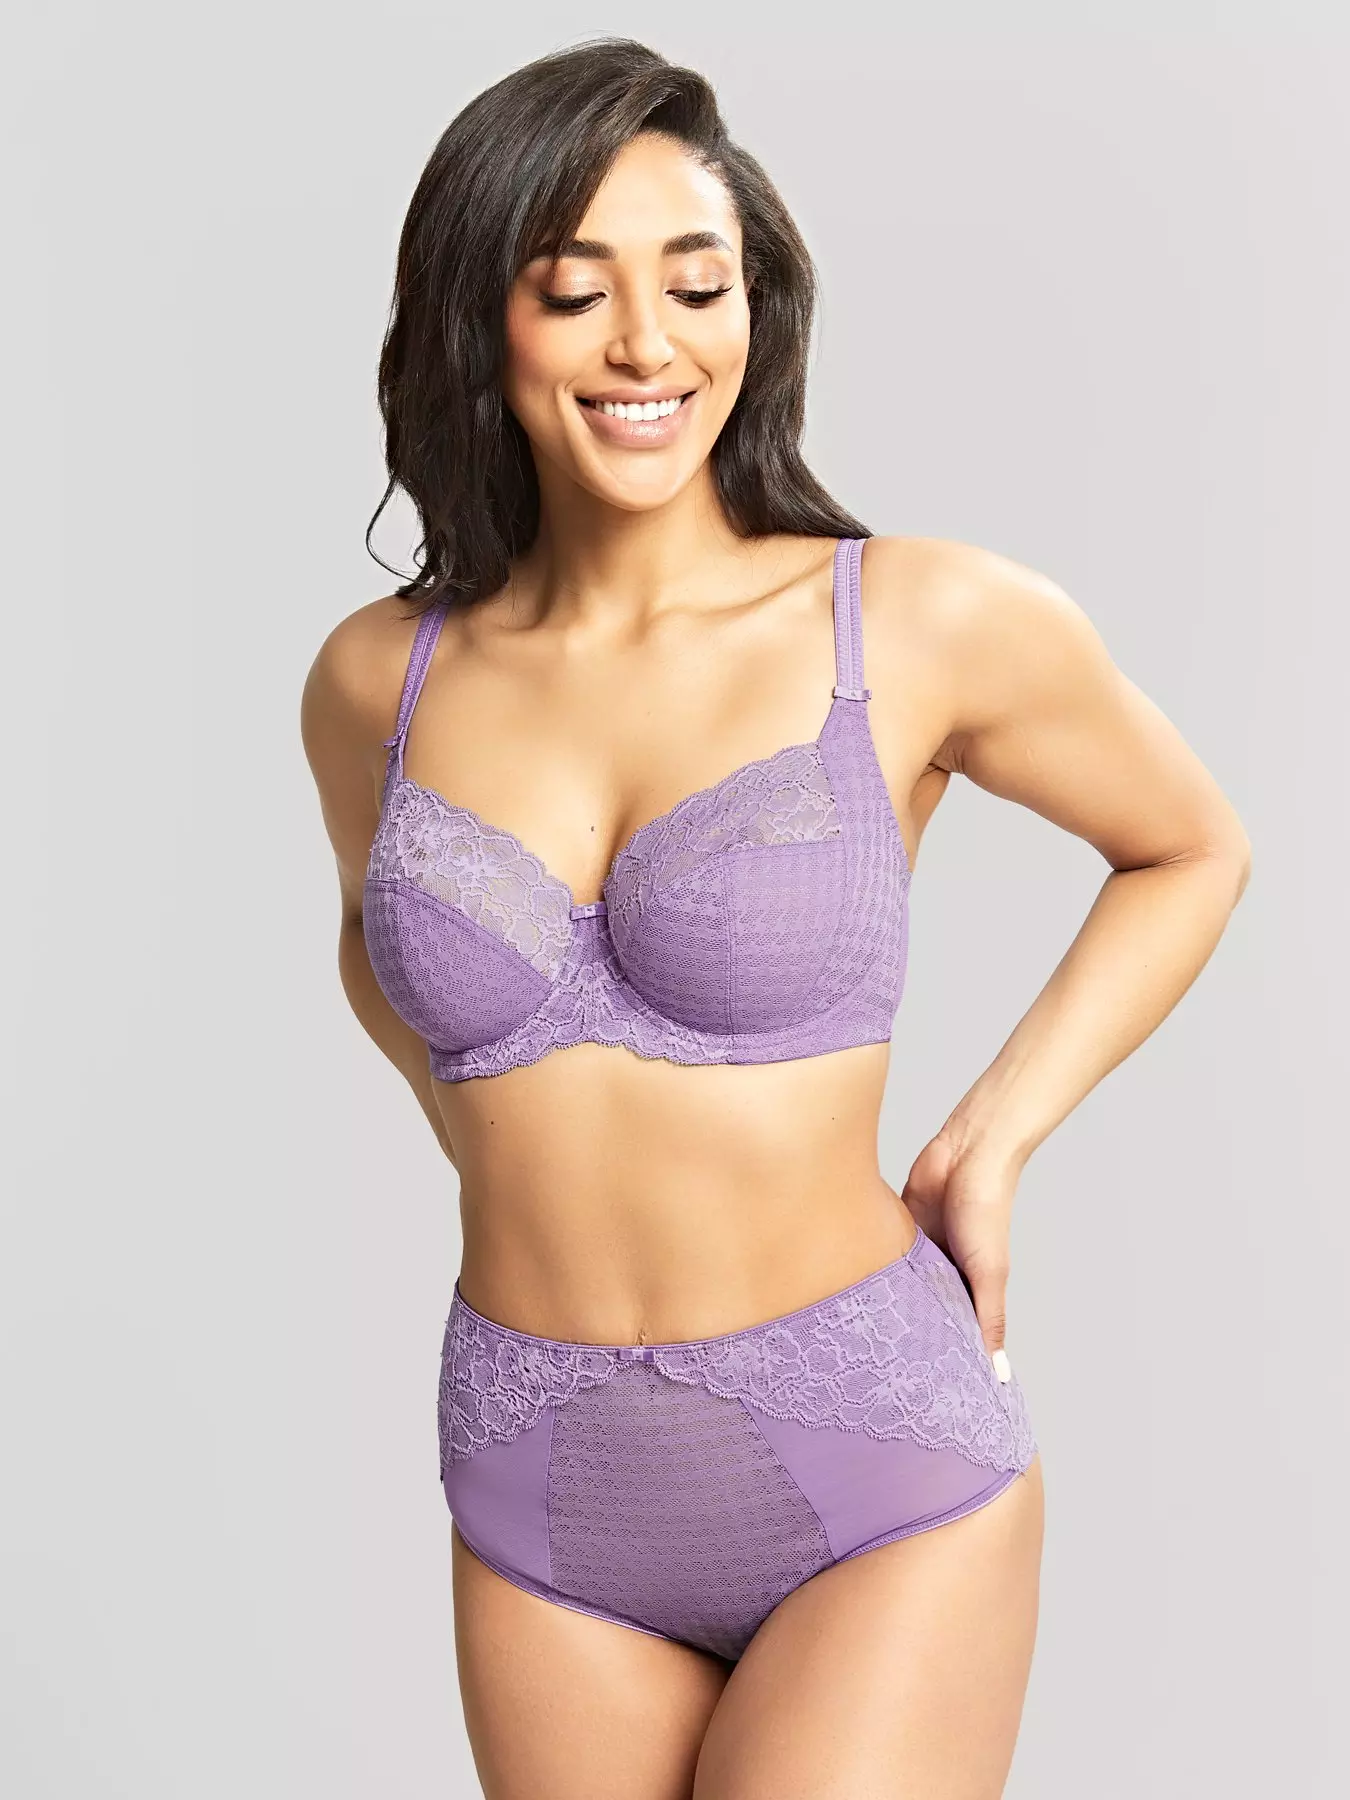 Panache Envy Full Cup Bra in Cobalt FINAL SALE (50% Off) - Busted